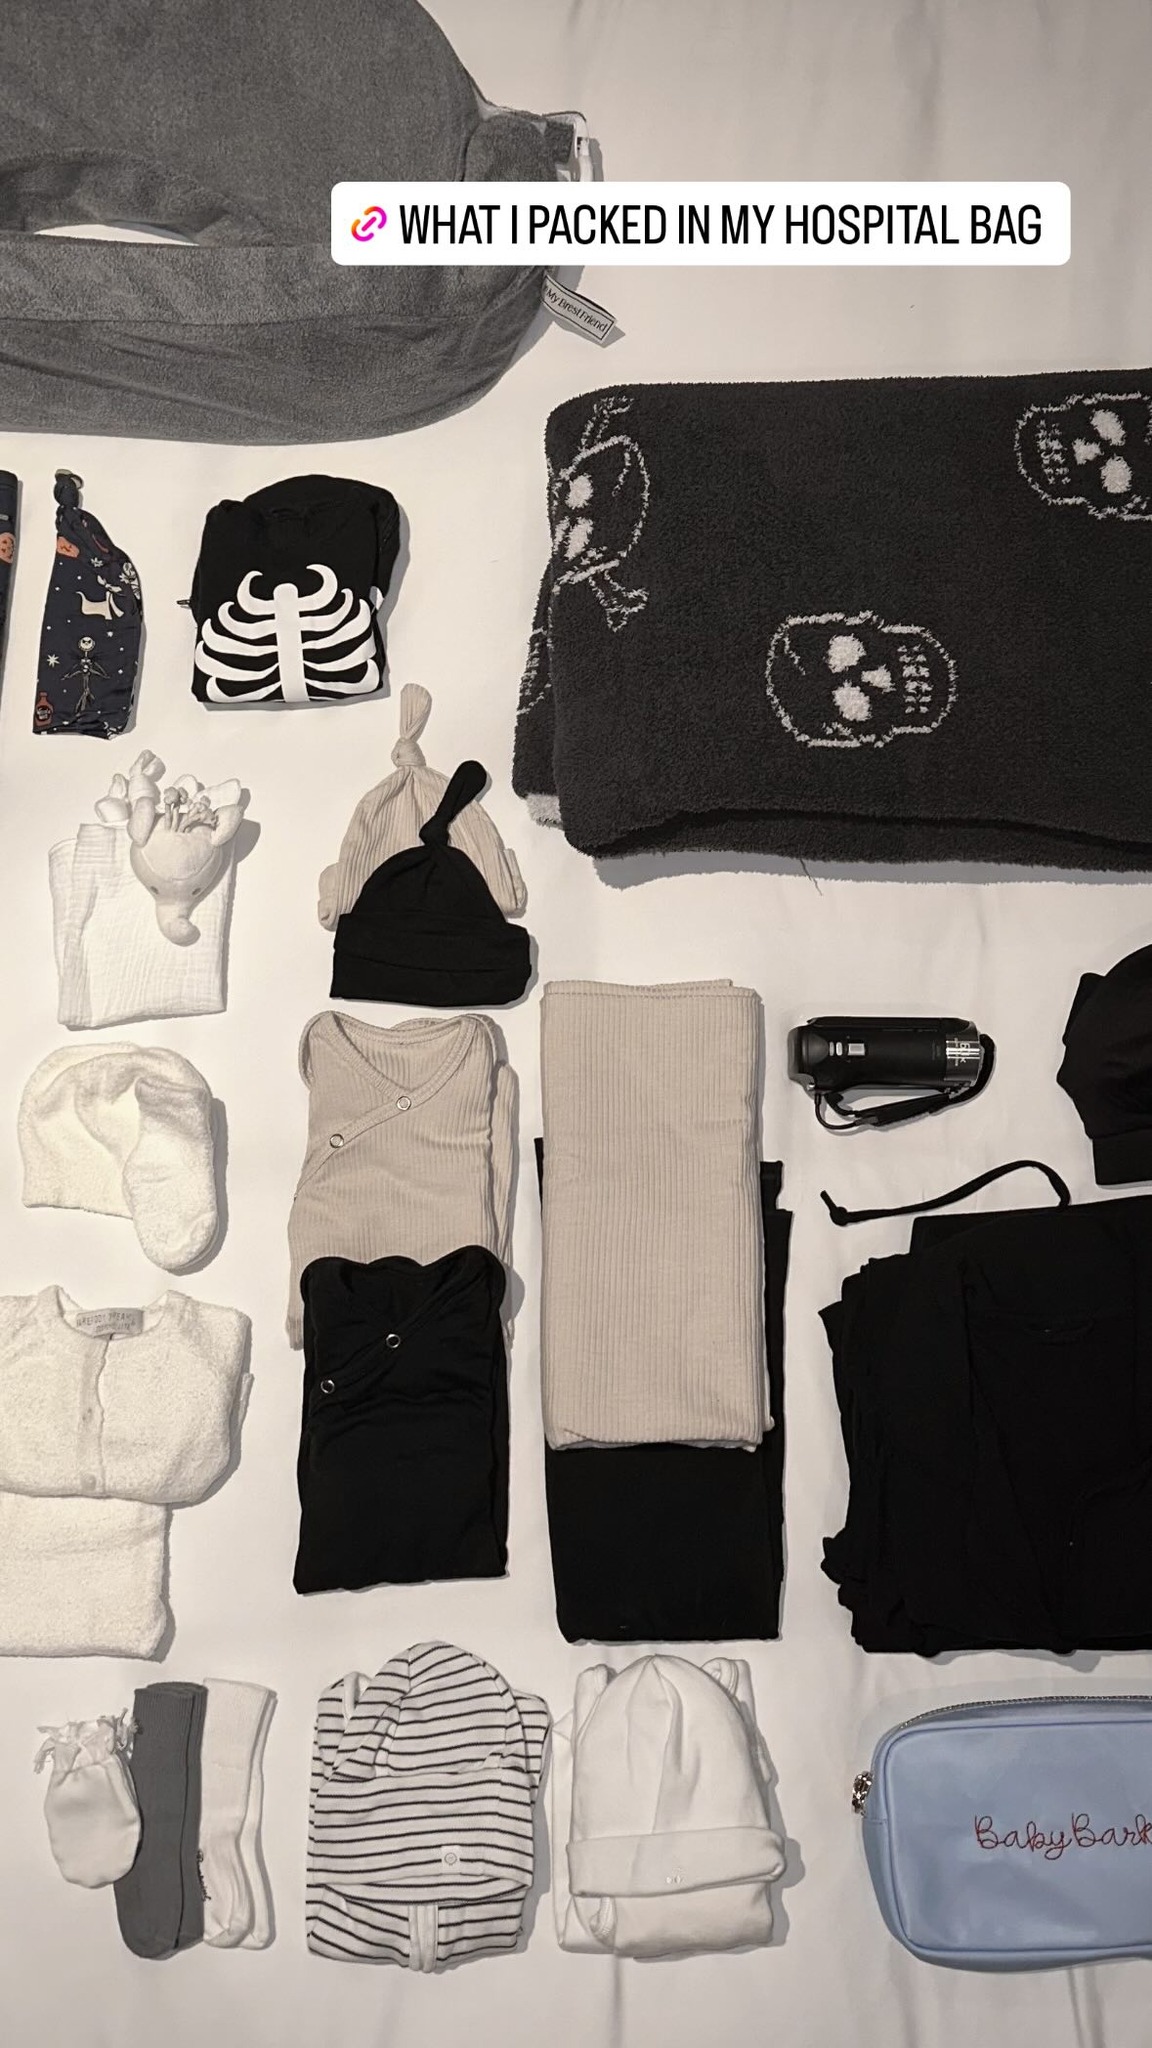 Kourtney shared a photo of everything she packed in her hospital bag ahead of her son's birth